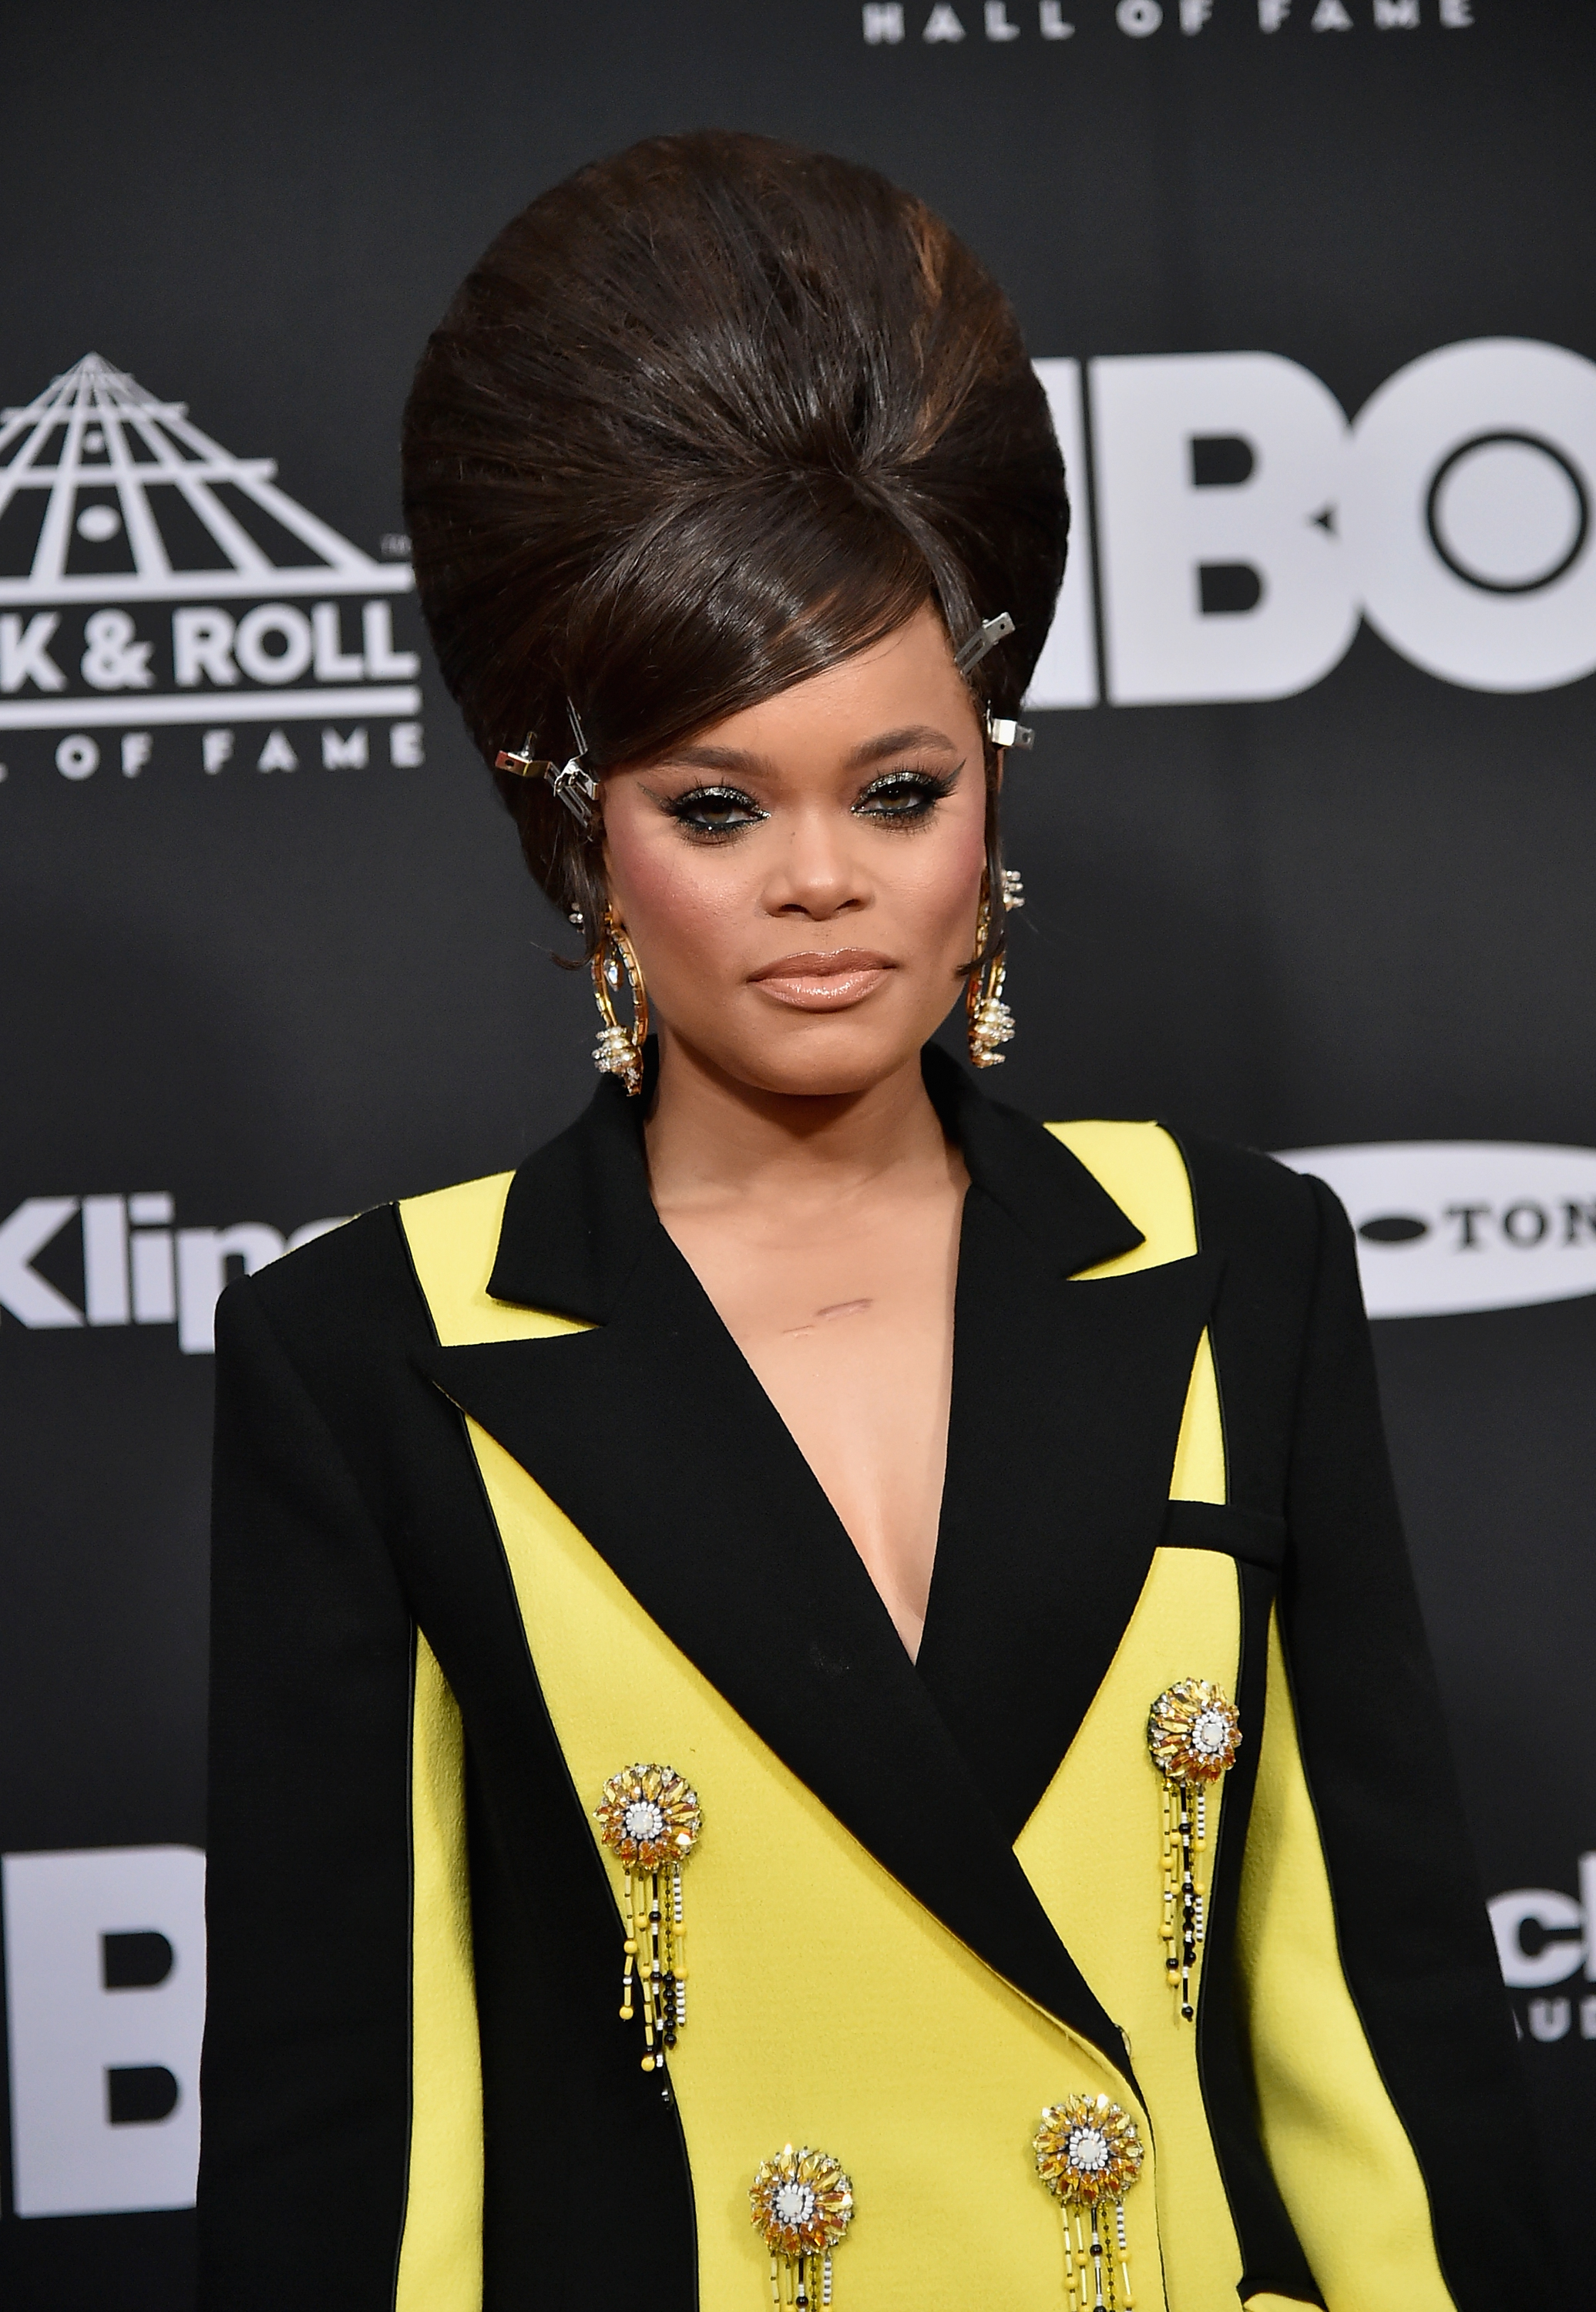 33rd Annual Rock & Roll Hall of Fame Induction Ceremony - Arrivals